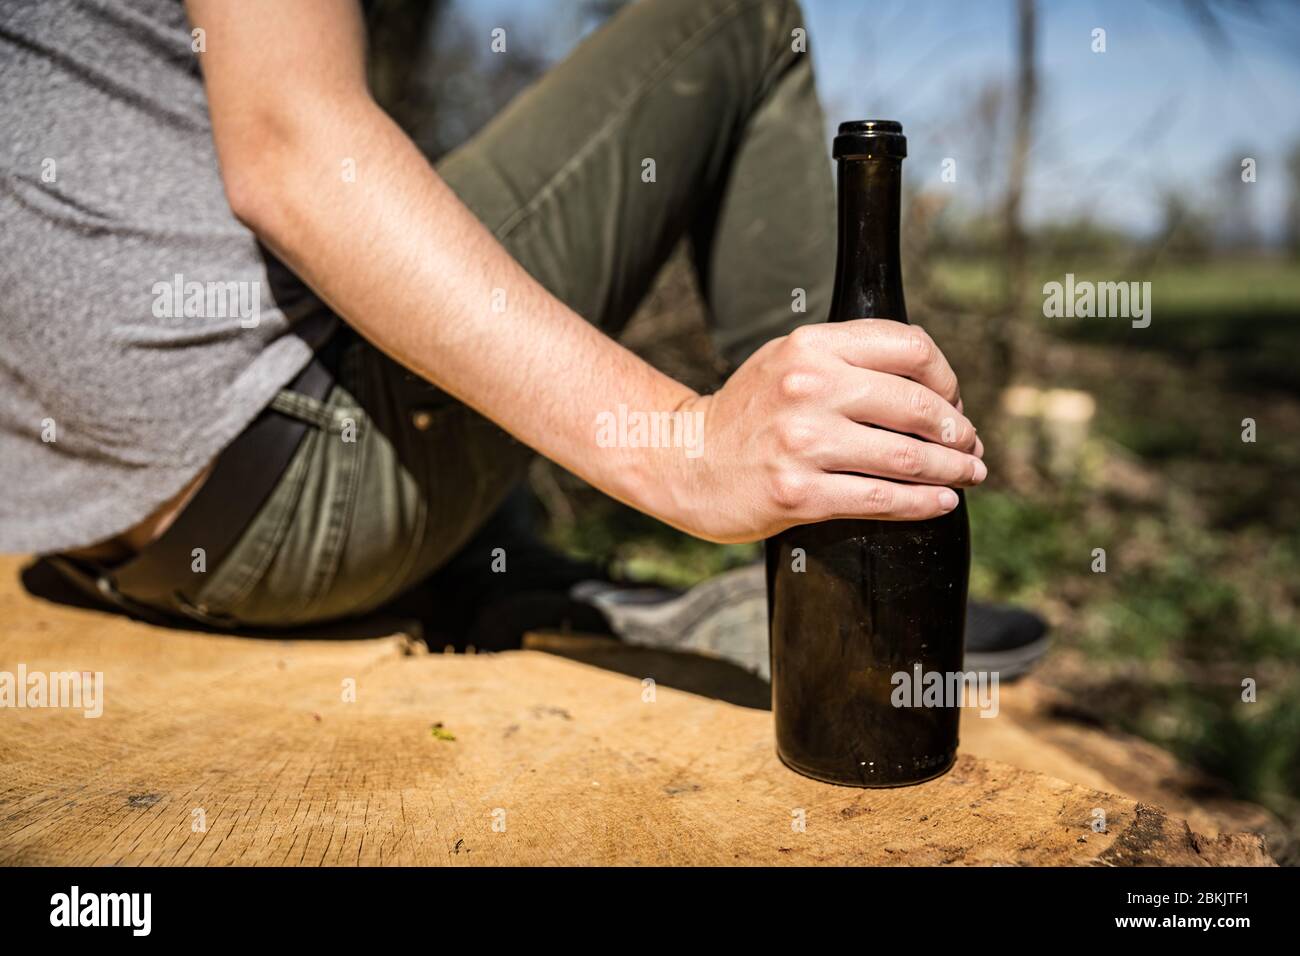 a bottle of wine in a man's hand, drinking alcohol in nature Stock Photo